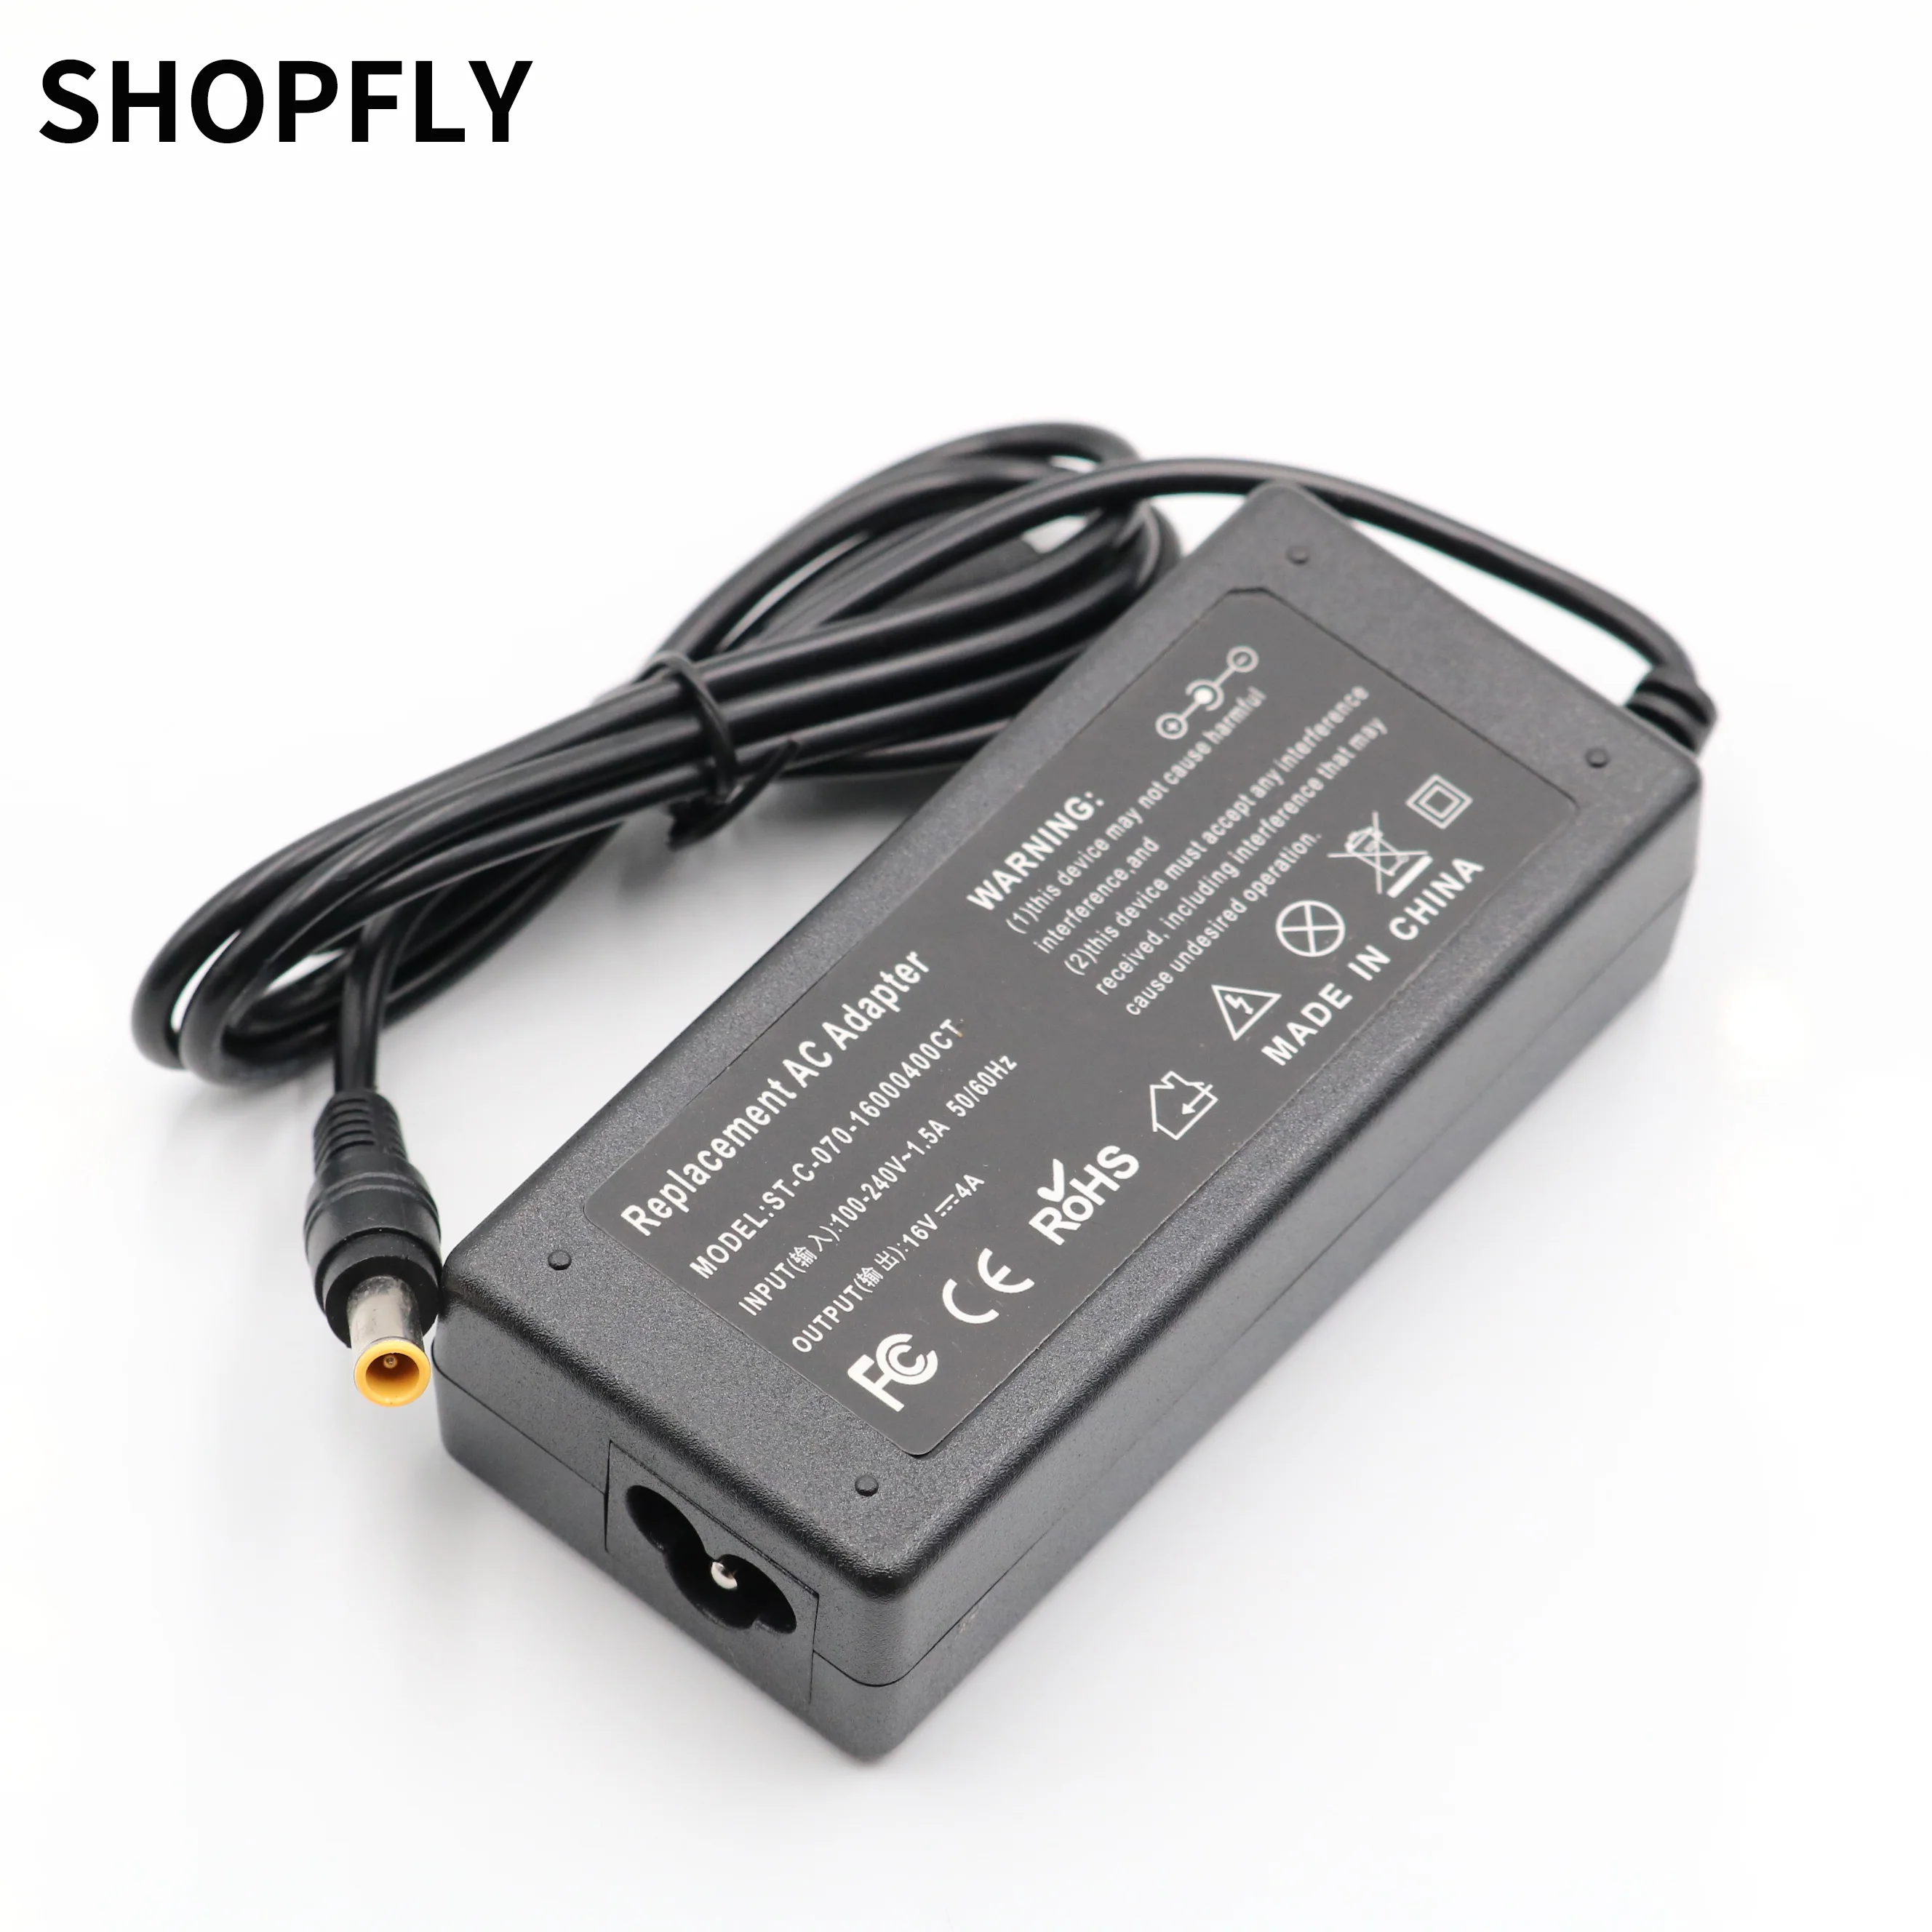 

16V 4A 65W 6.5*4.4mm Laptop AC Charger Power Adapter Supply For SONY VAIO PCG-4H2P PCG-SR series